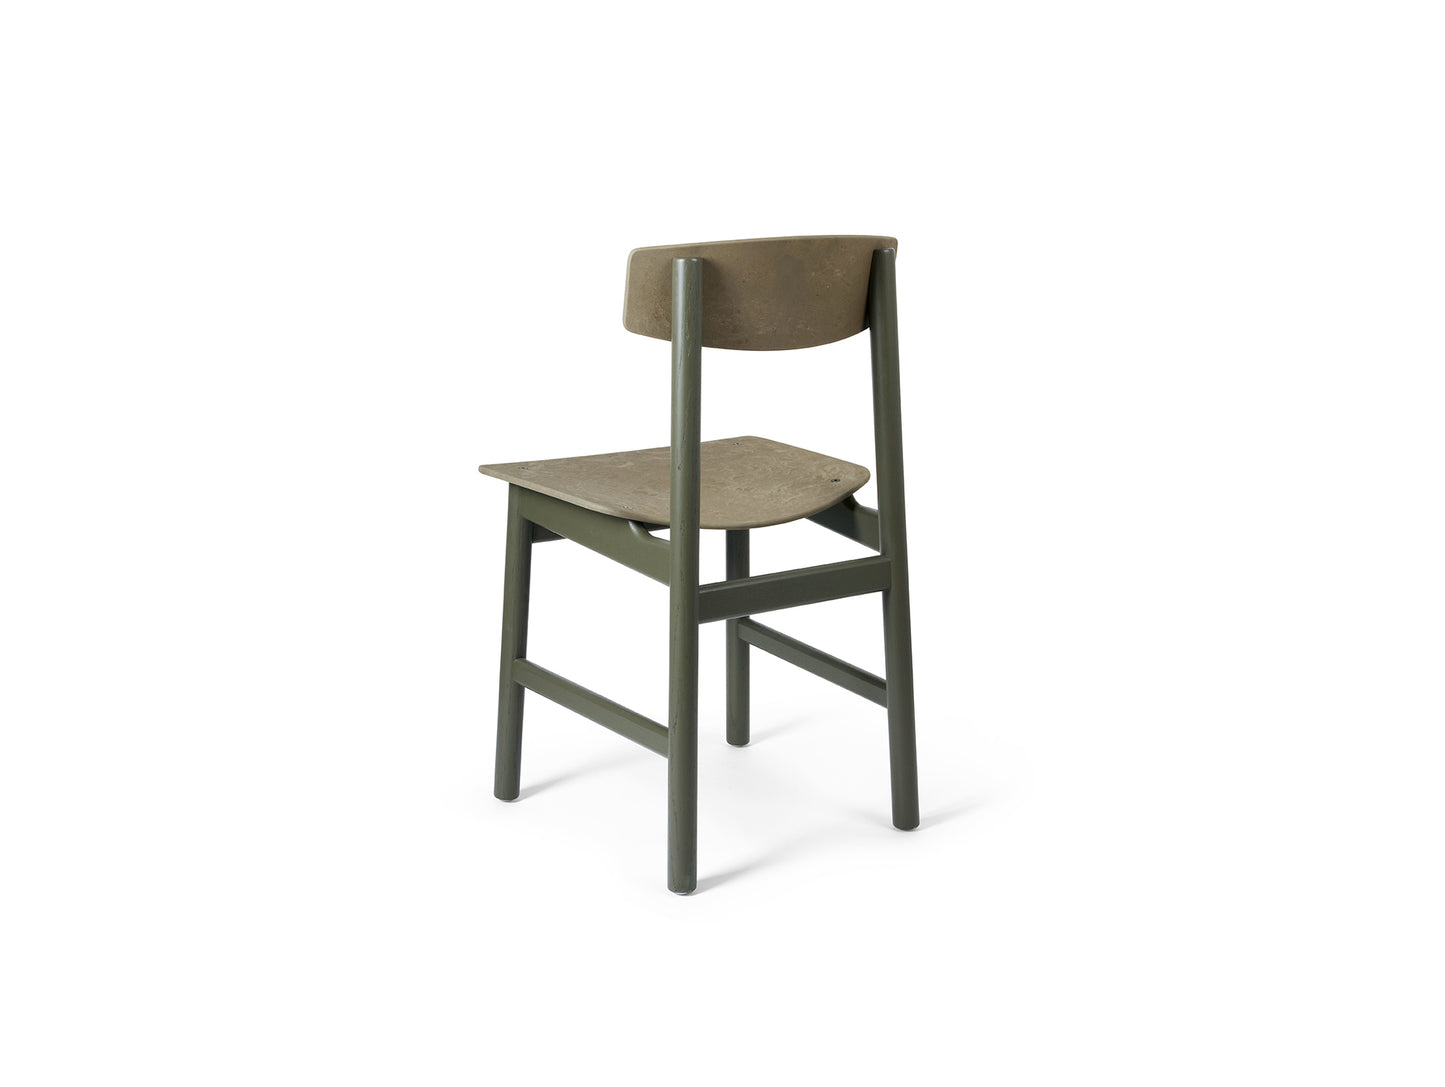 Conscious Chair 3162 by Mater - Green Stained Oak / Coffee Waste Green